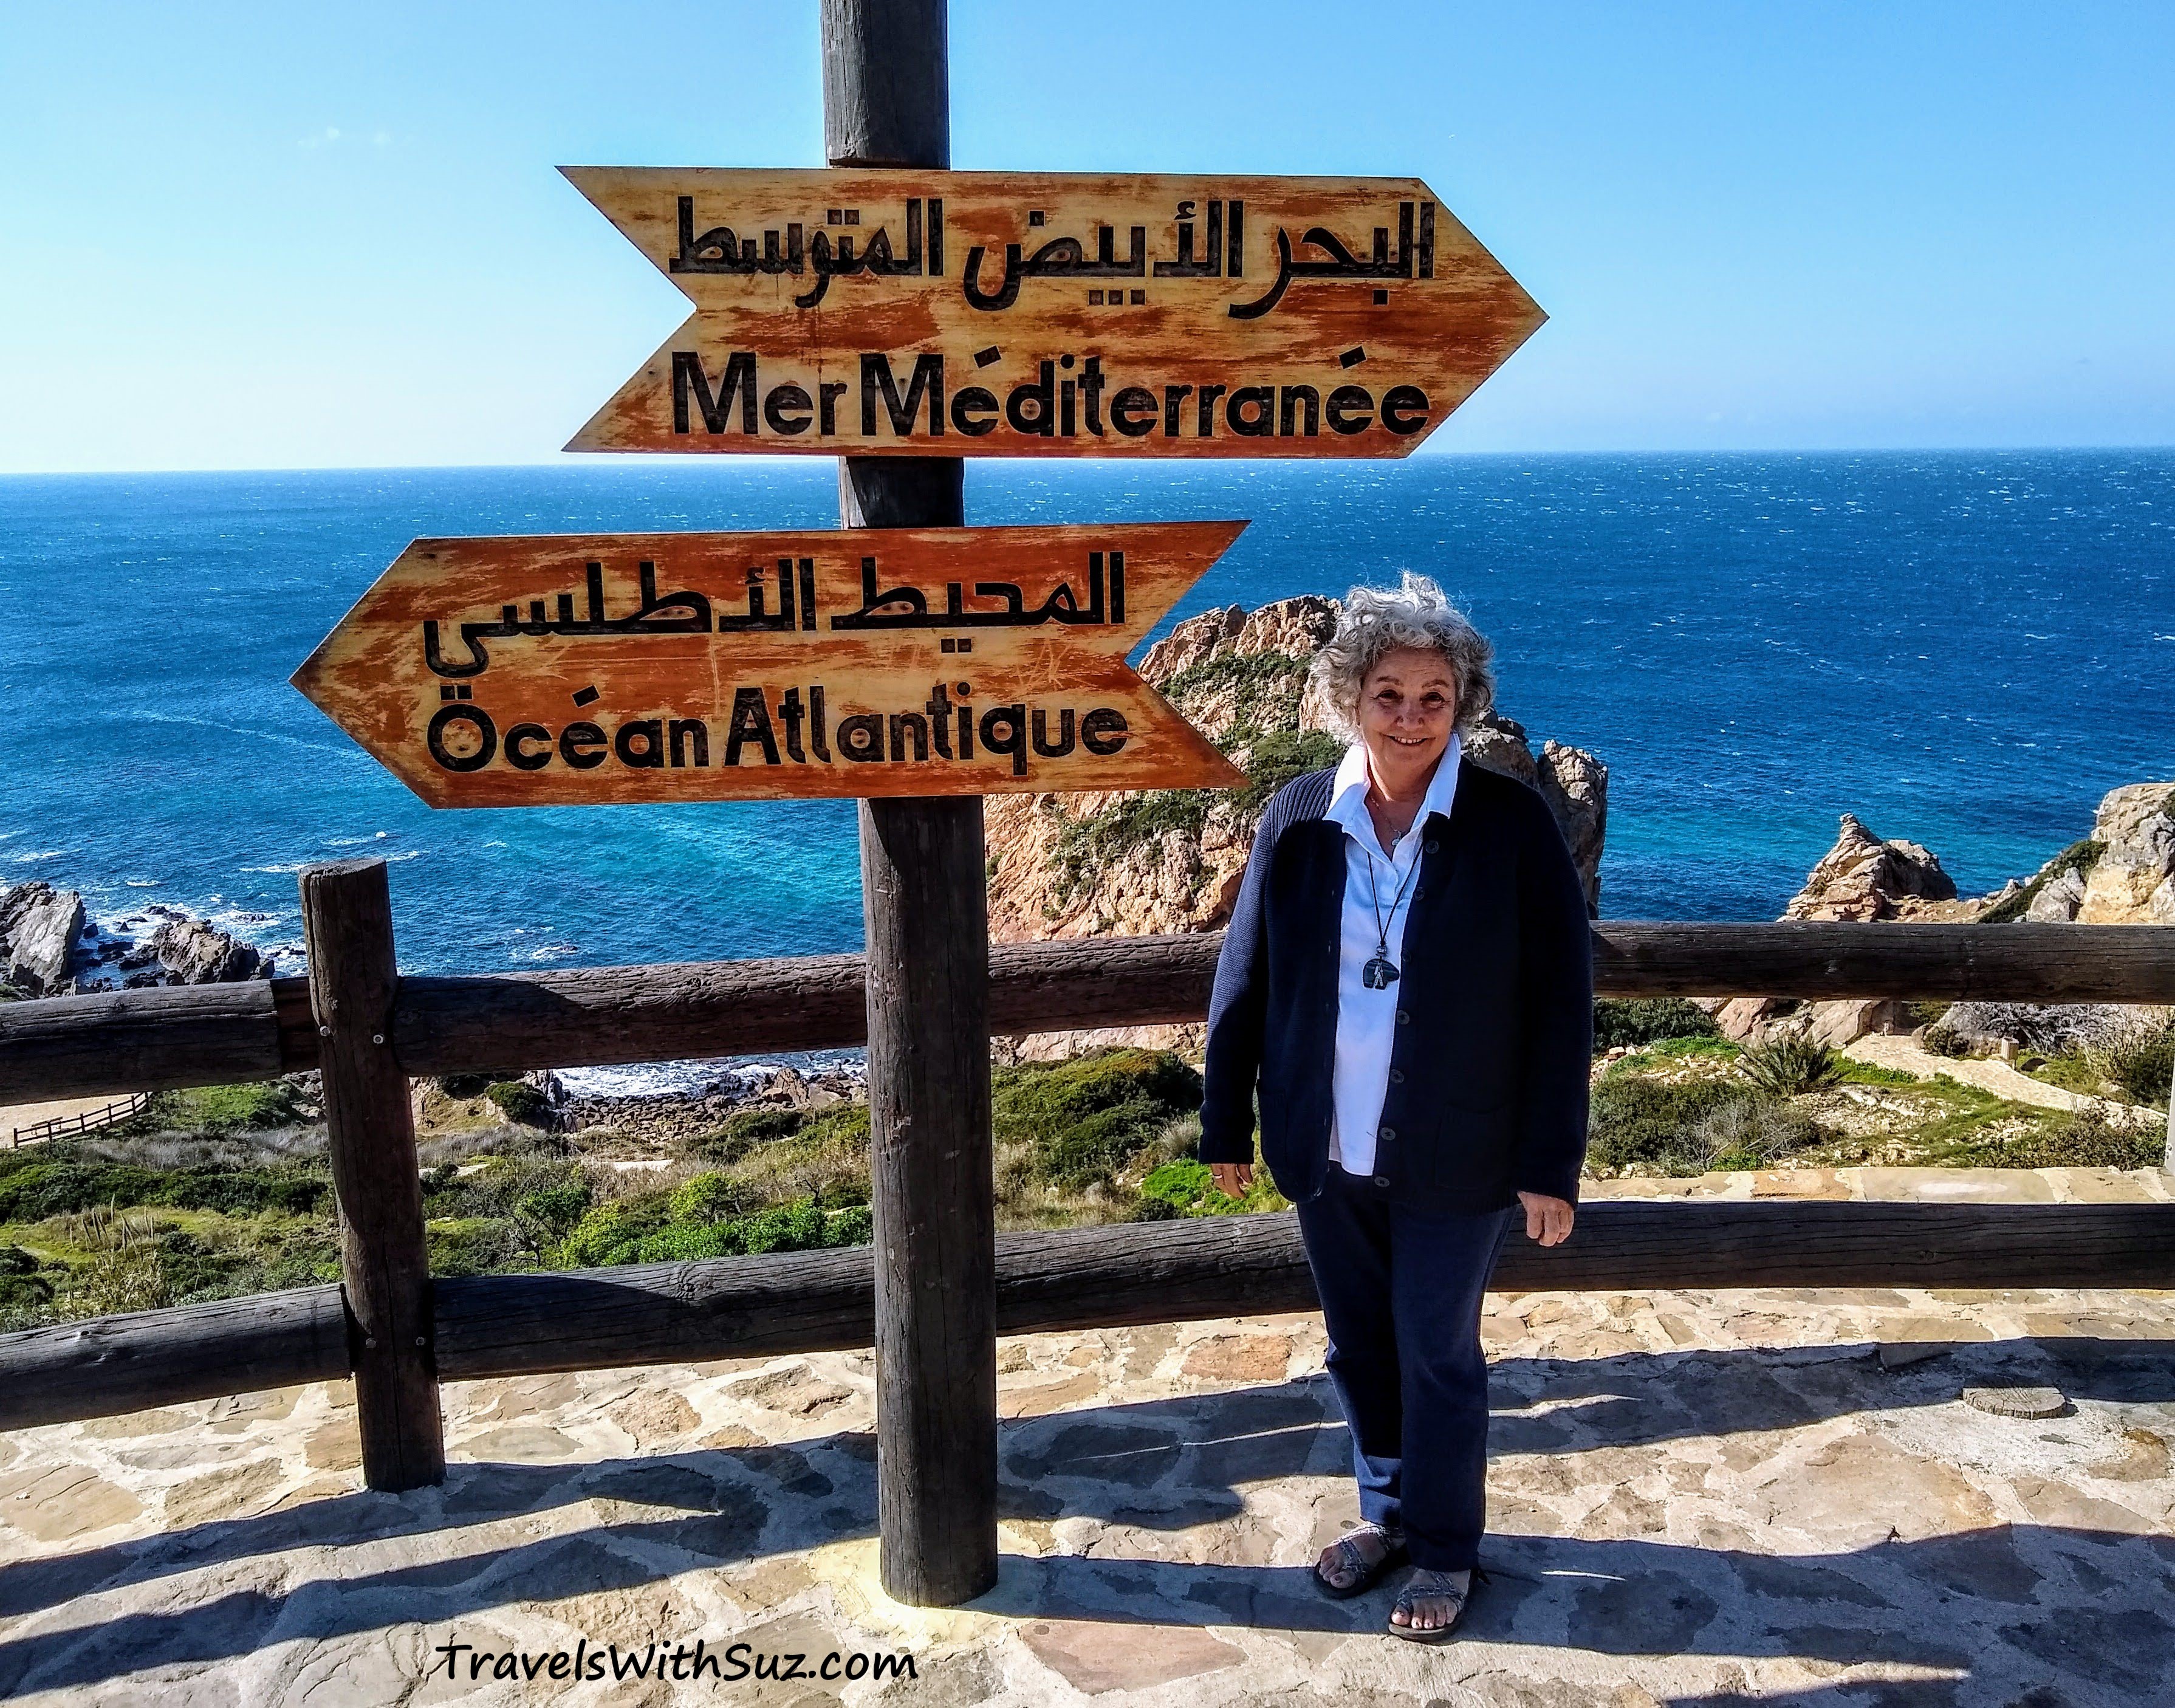 Suz standing at the convergence of the Mediterranean Sea and the Atlantic Ocean